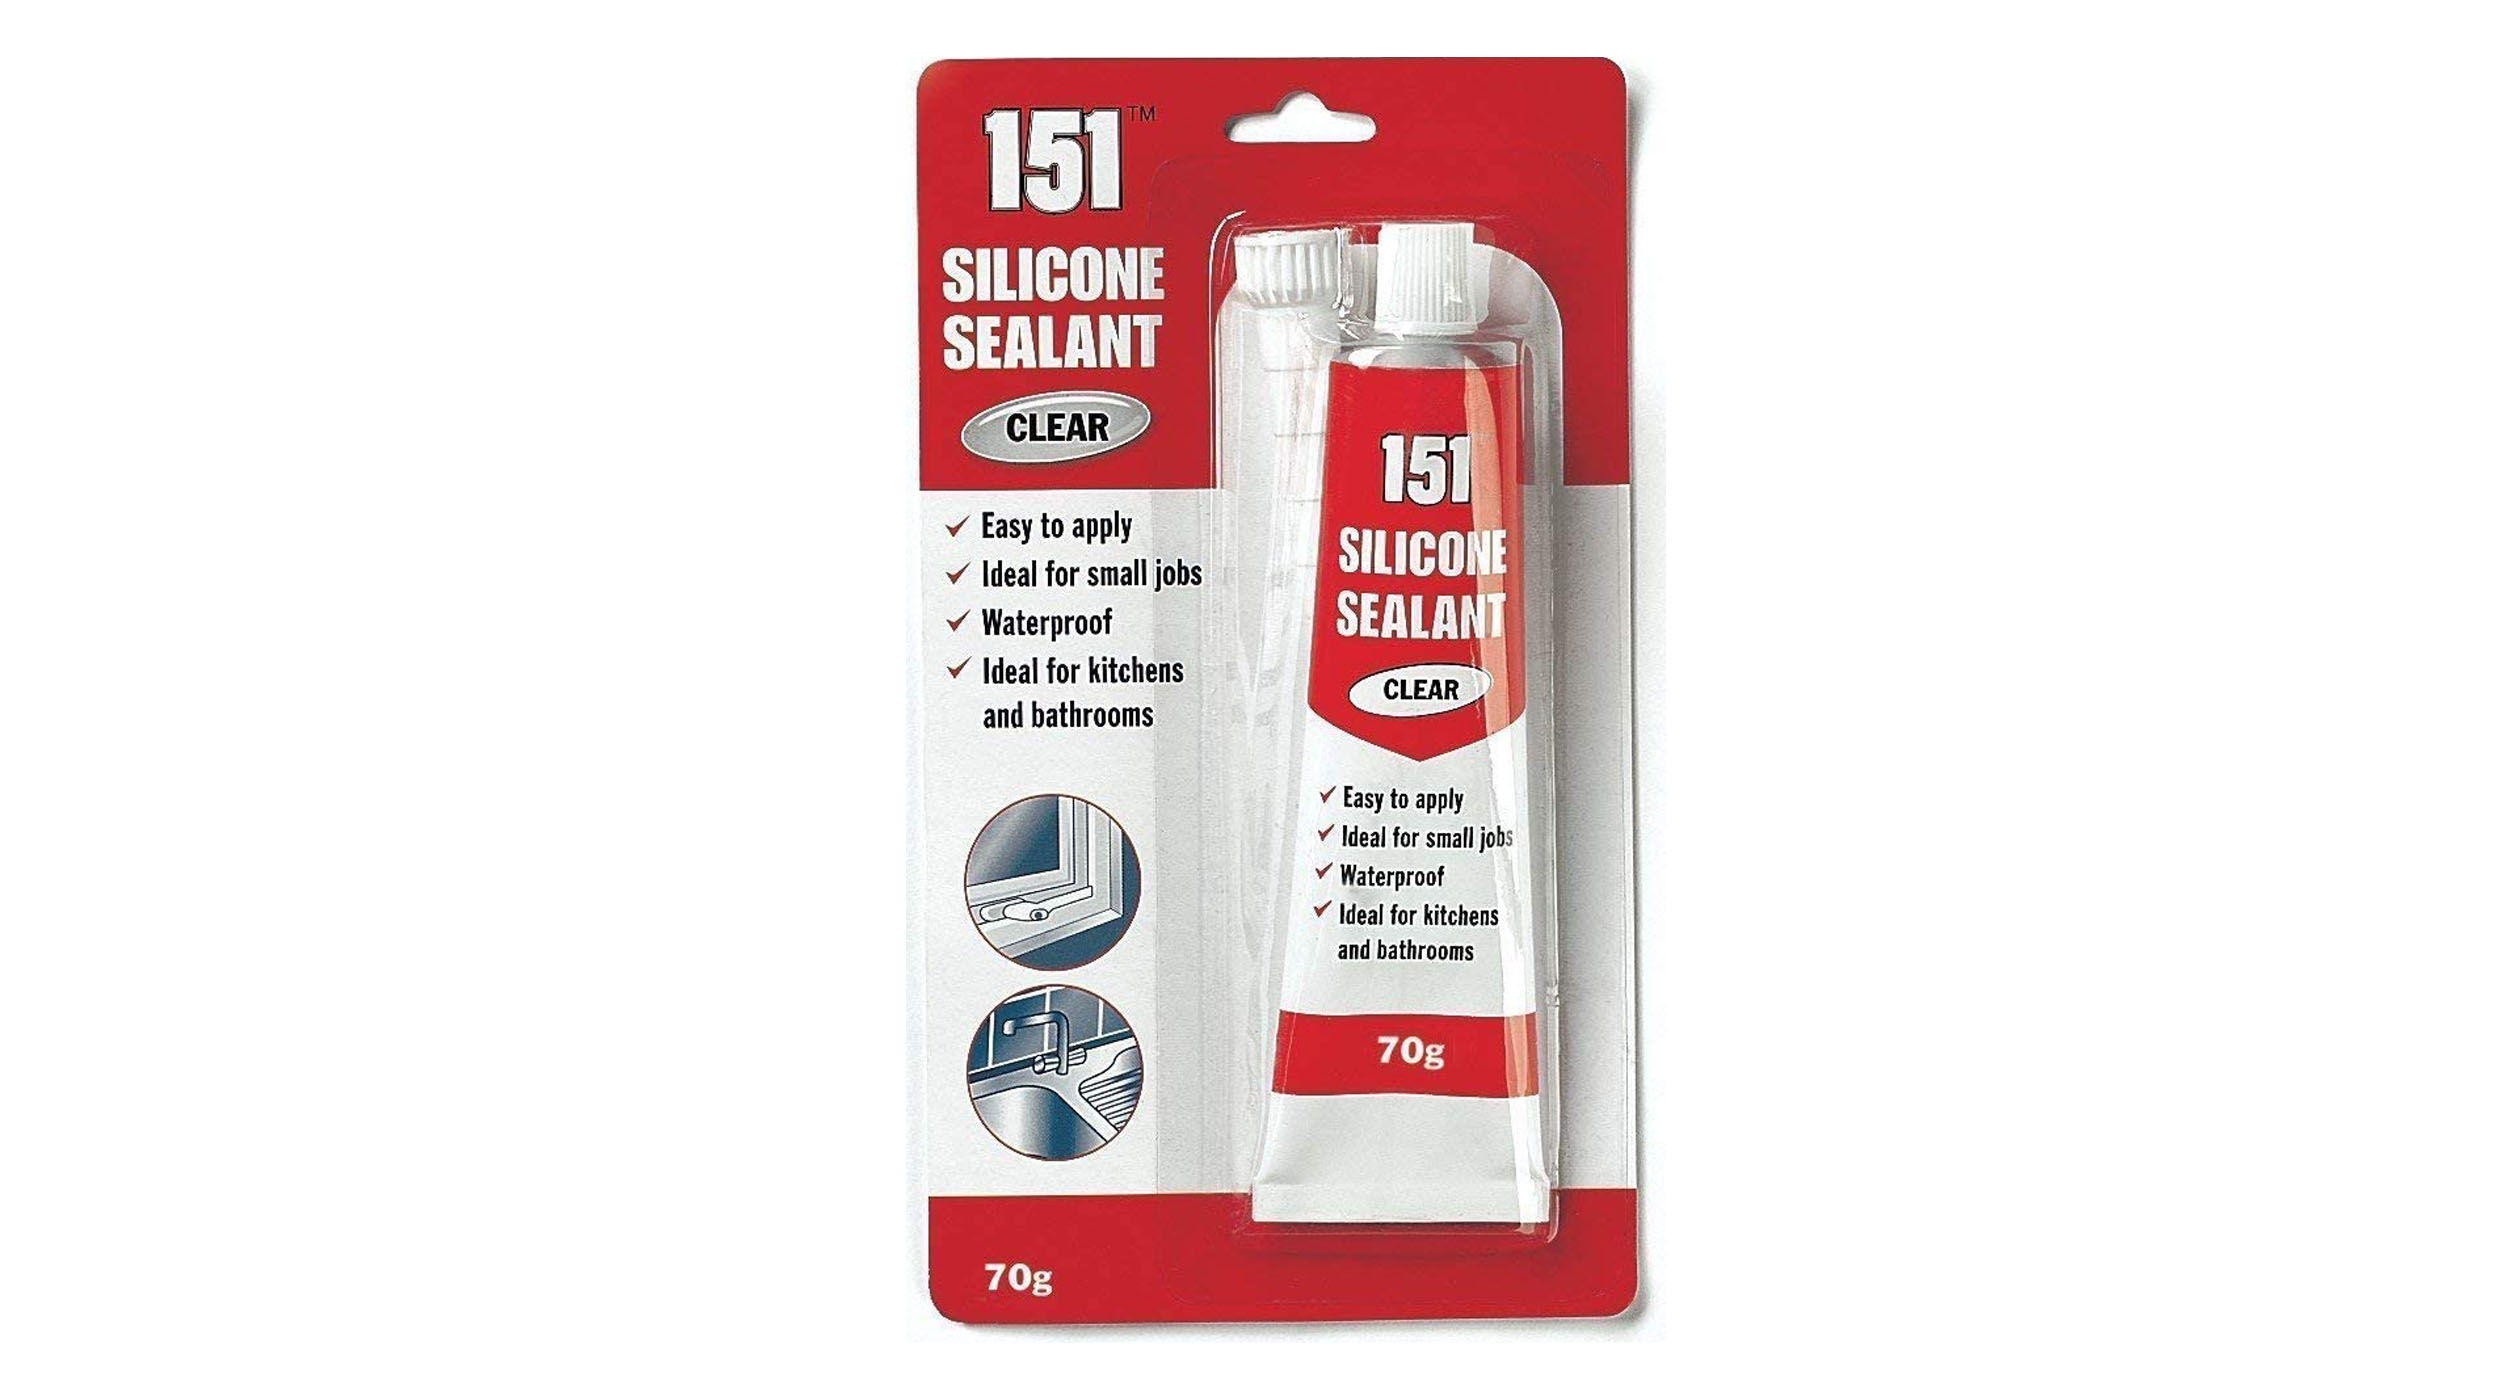 The 151 Silicone Sealant is one of the best bathroom sealants